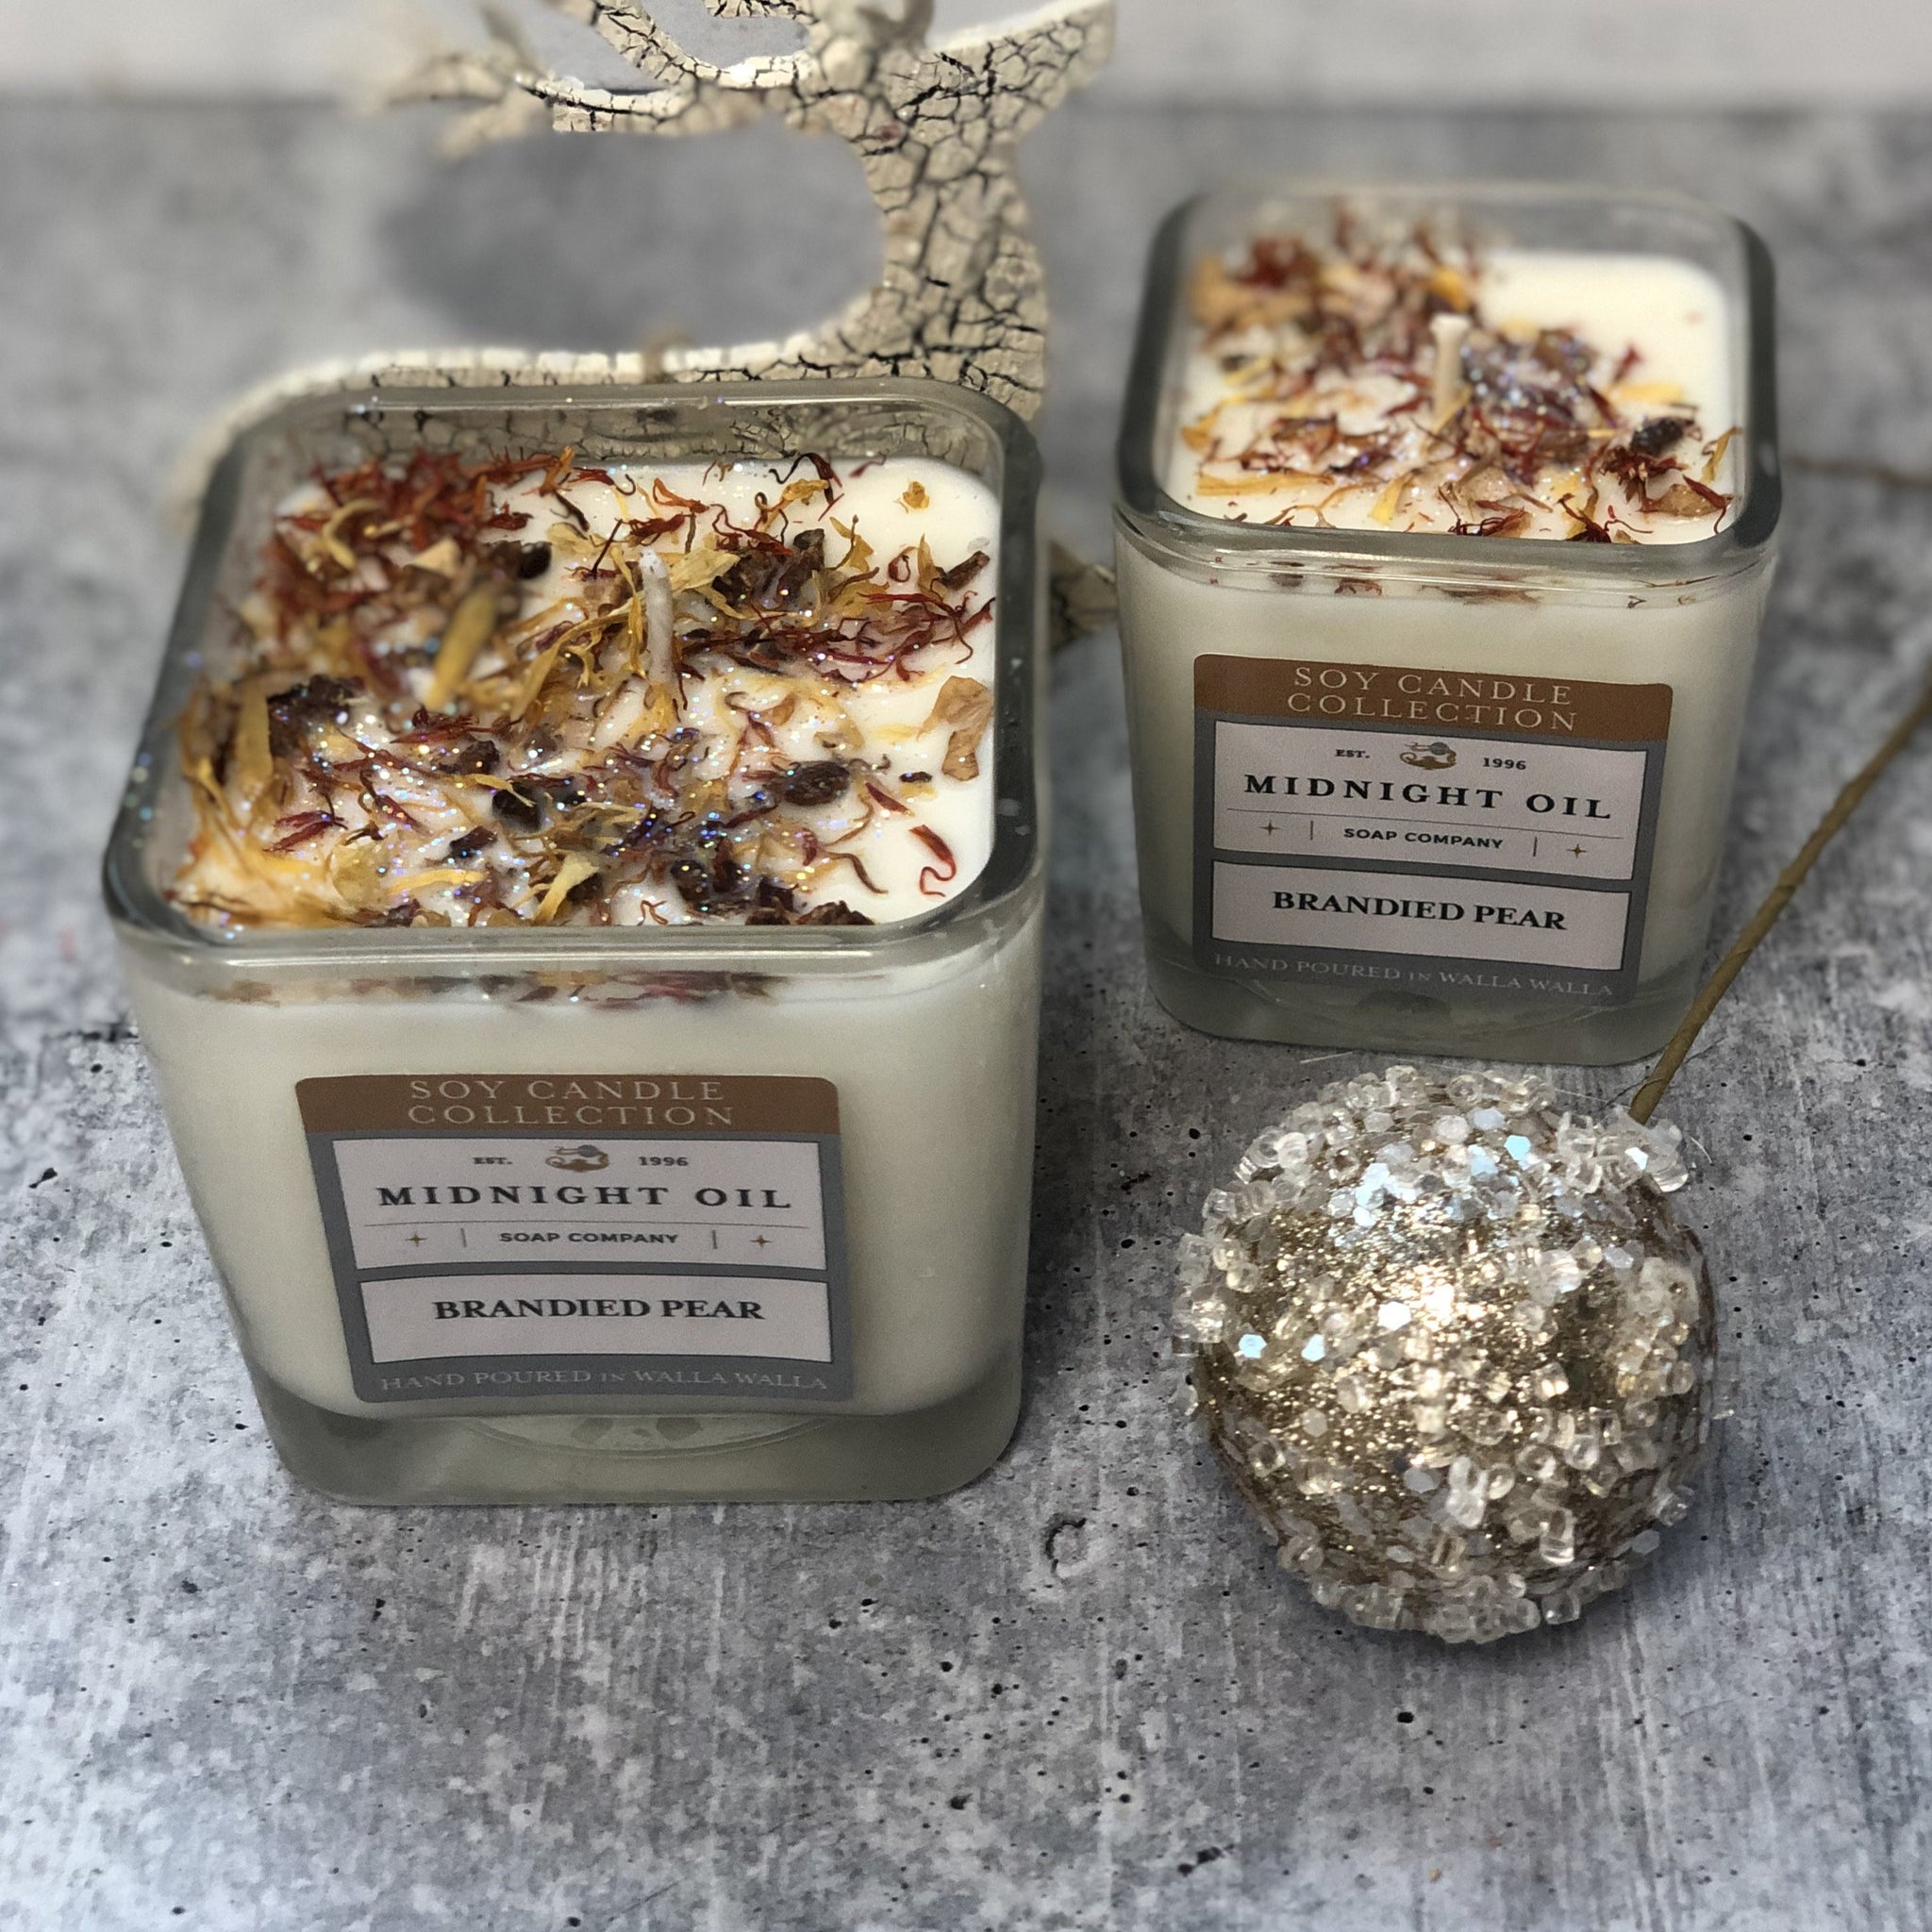 BRANDIED PEAR (Soy Candle)